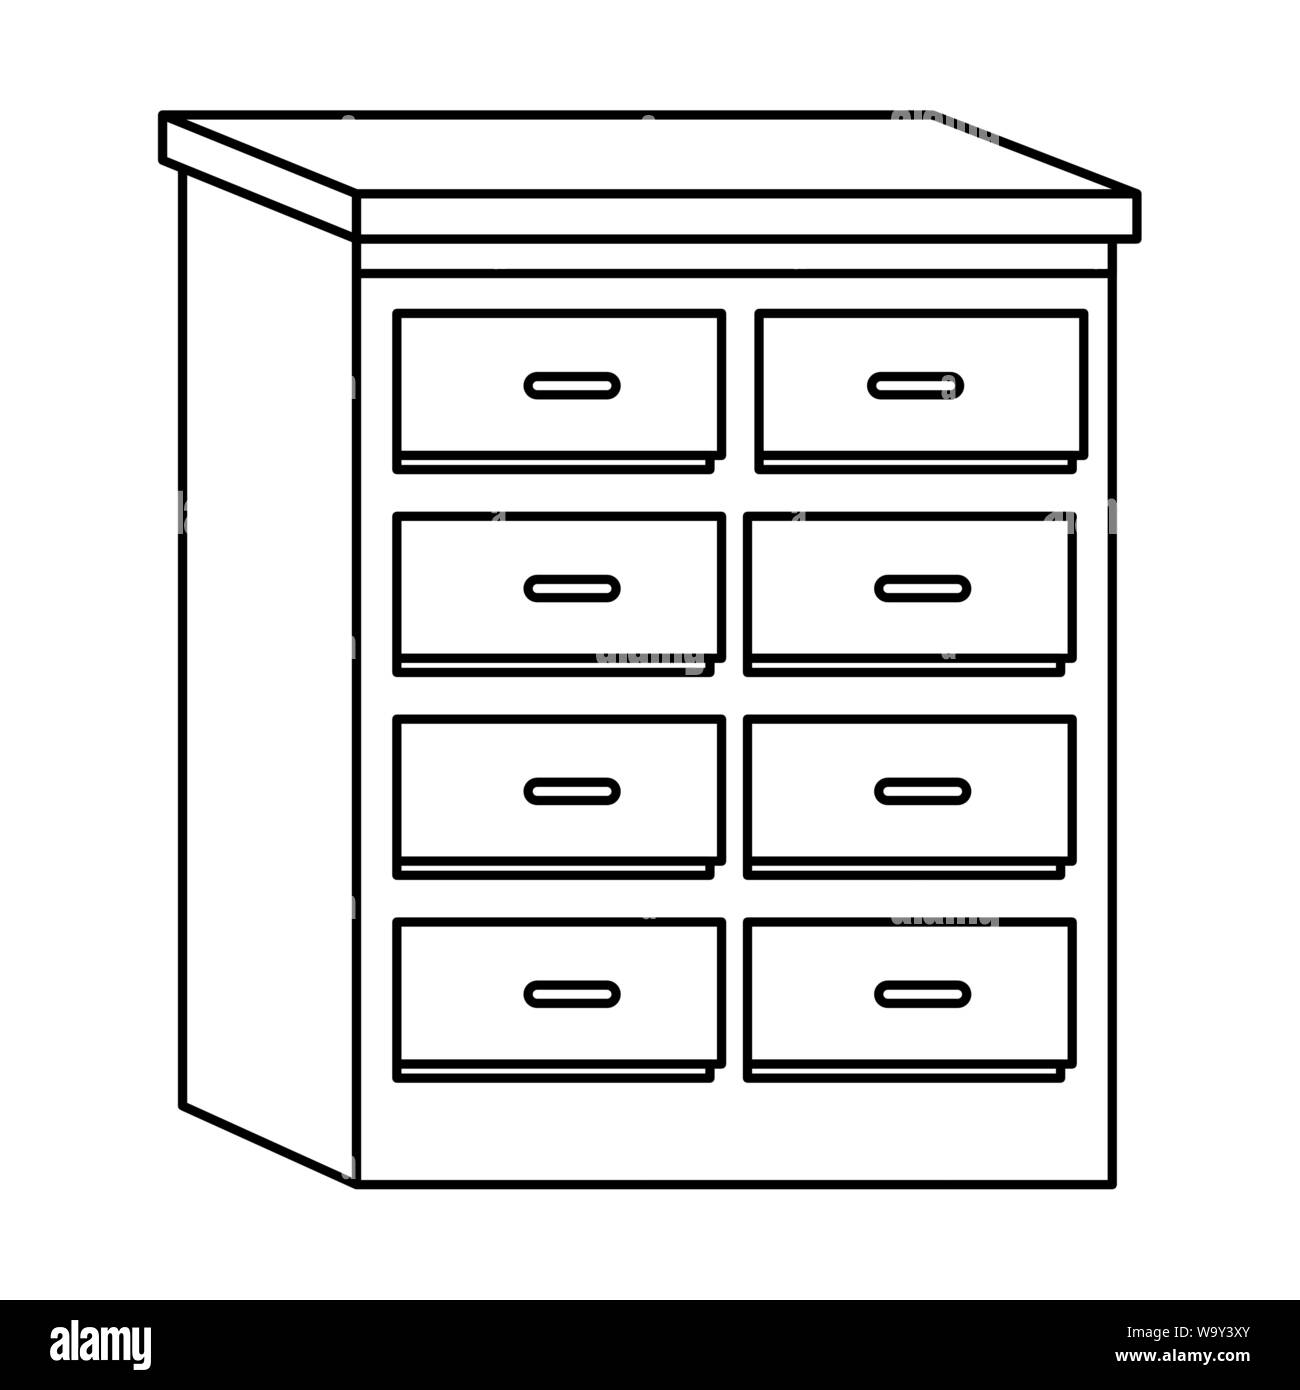 Office Drawer Furniture Cartoon Isolated In Black And White Stock